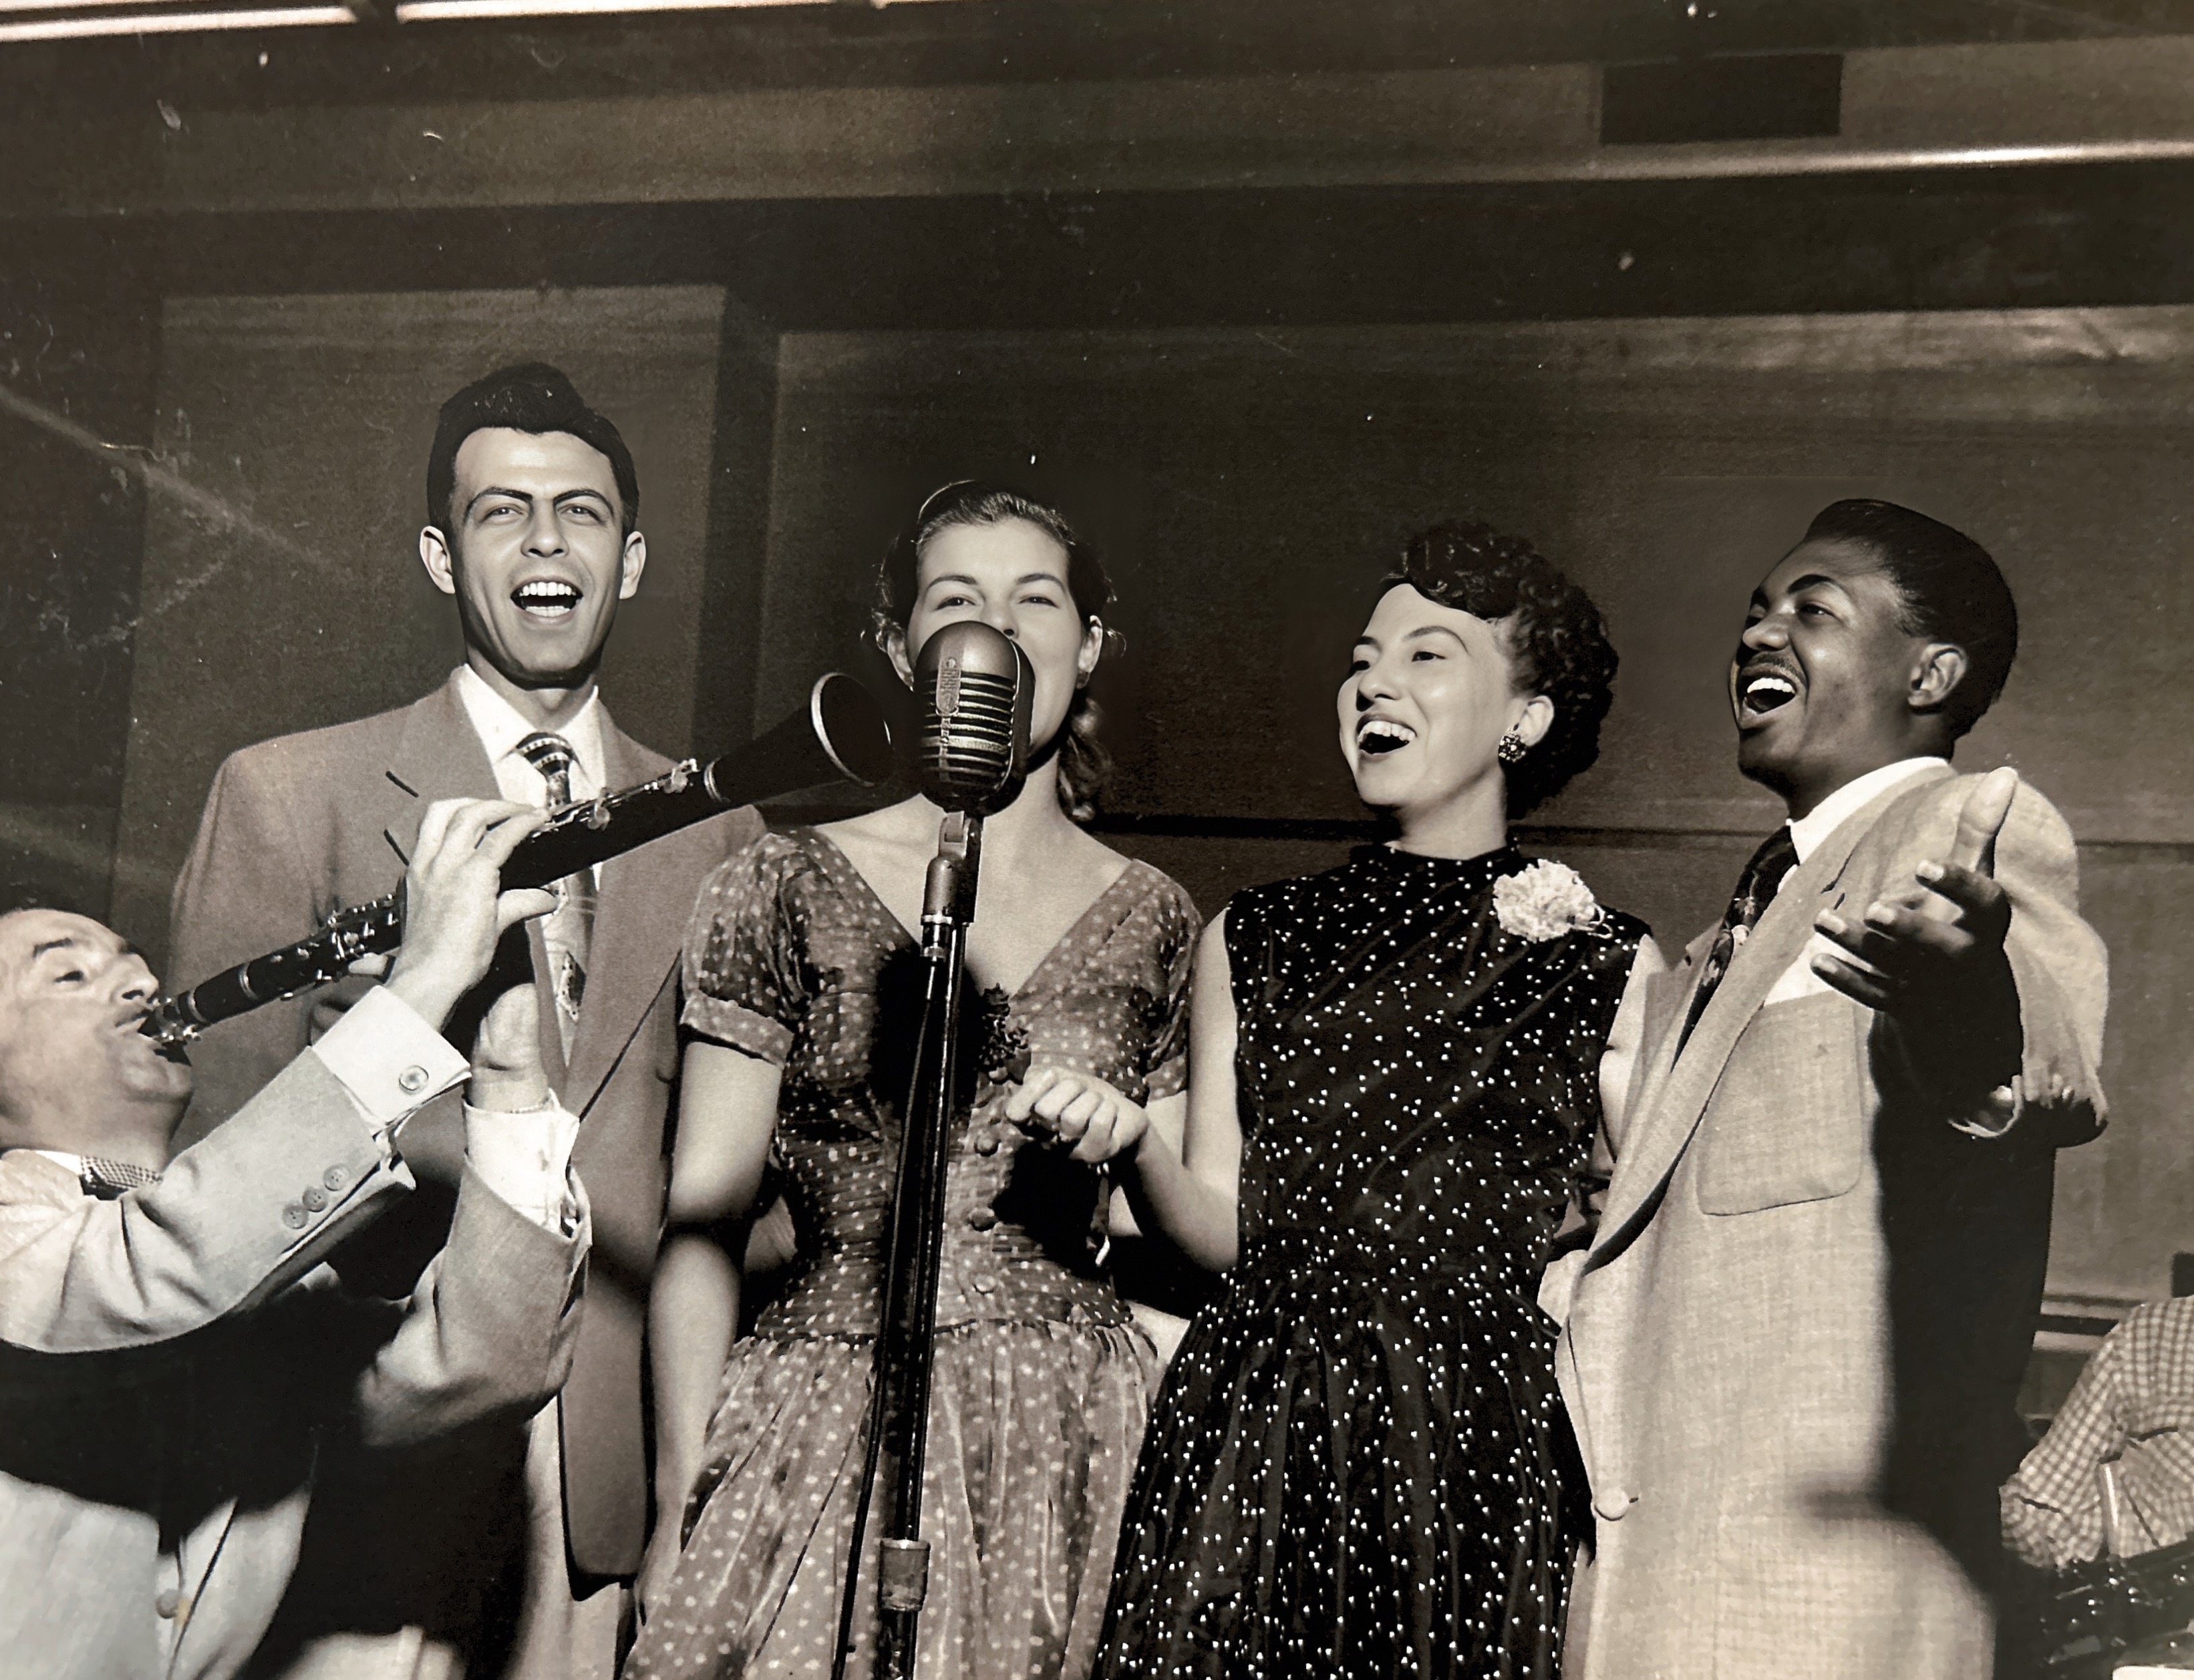 Emanuel (Emil) Weisel Singing in the Swing Band 1940s